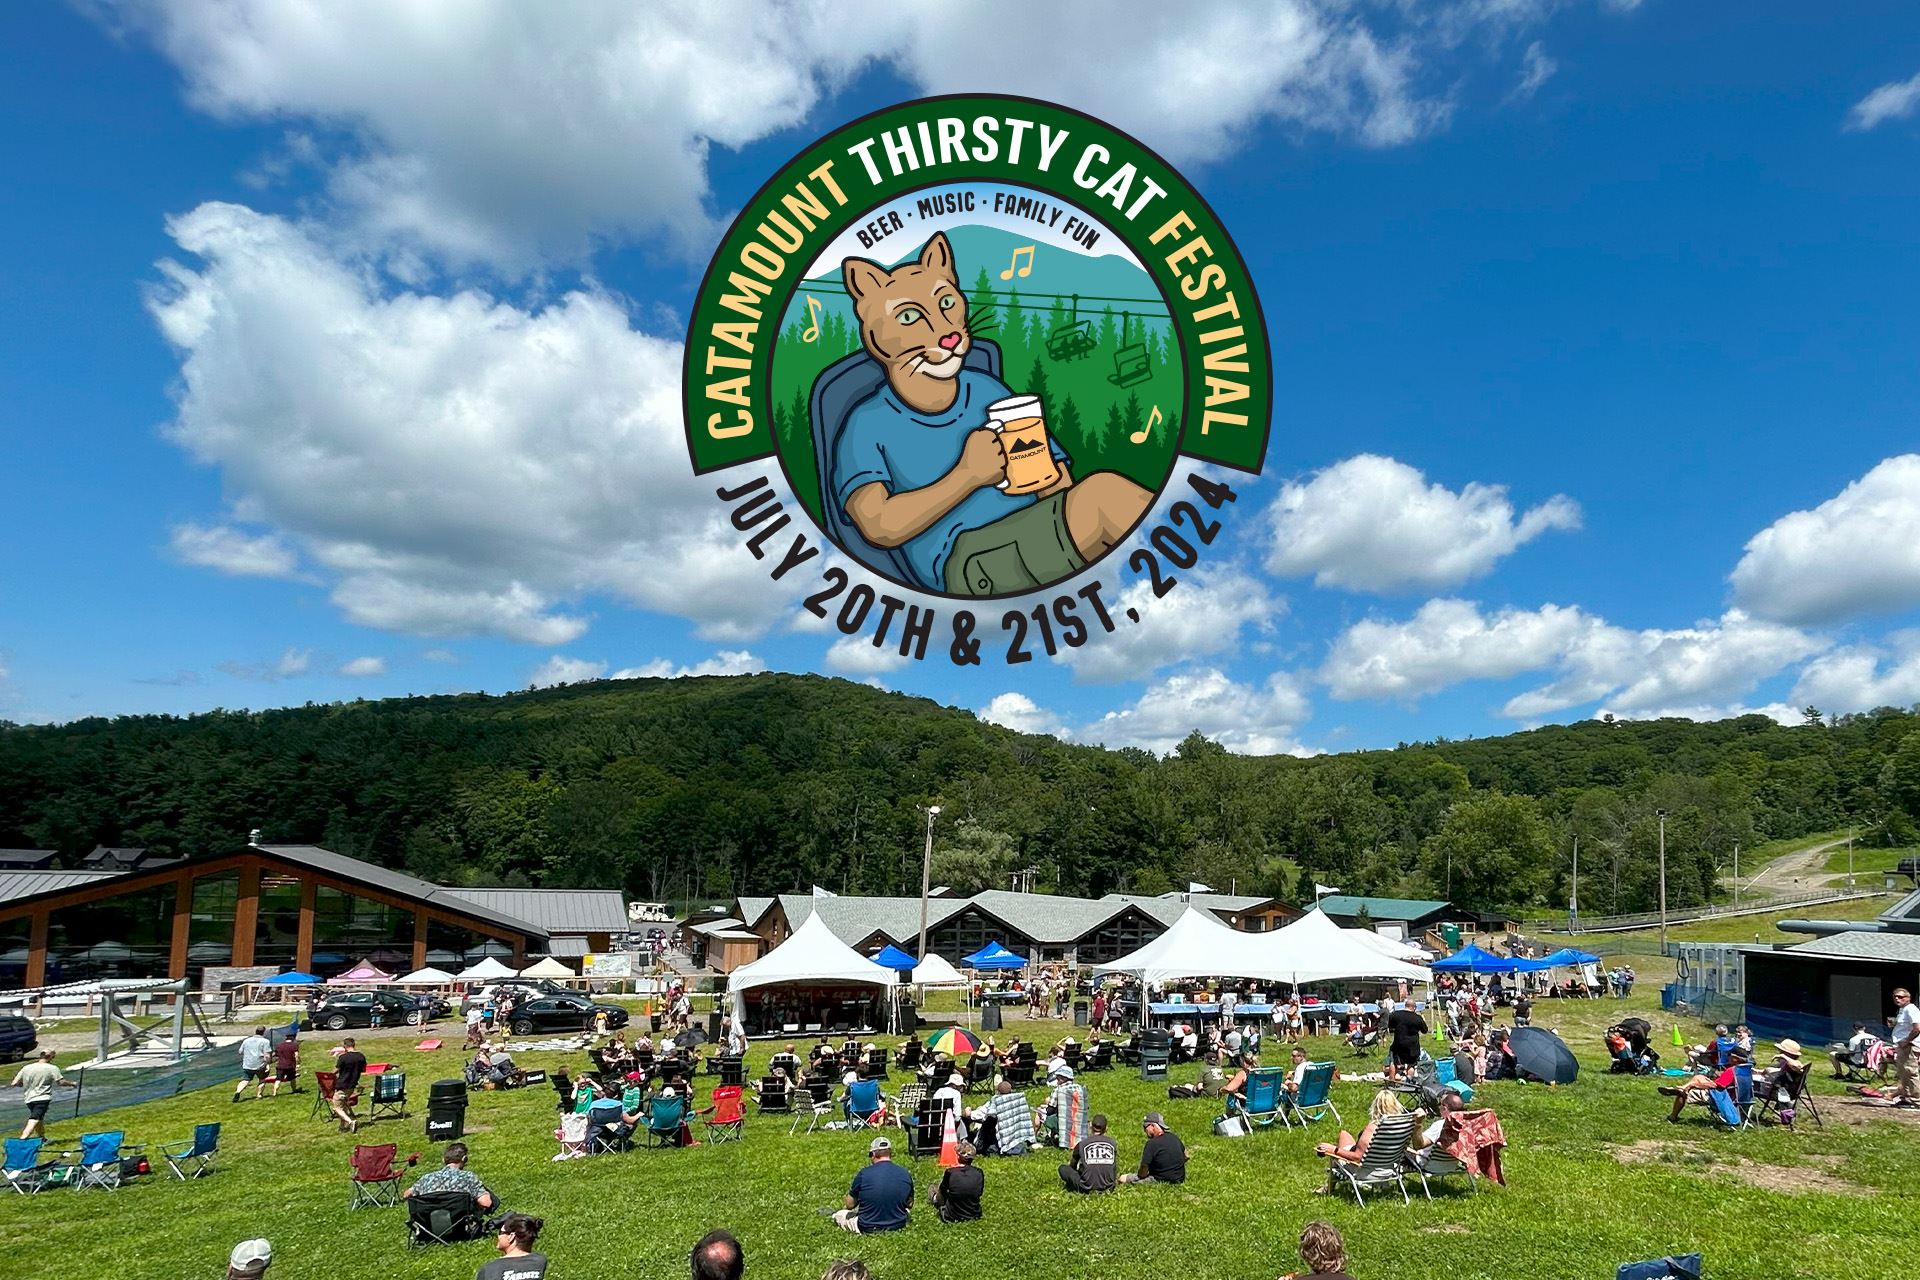 Picture for category Catamount’s 2nd annual “Thirsty Cat” Beer/Wine/Music Festival